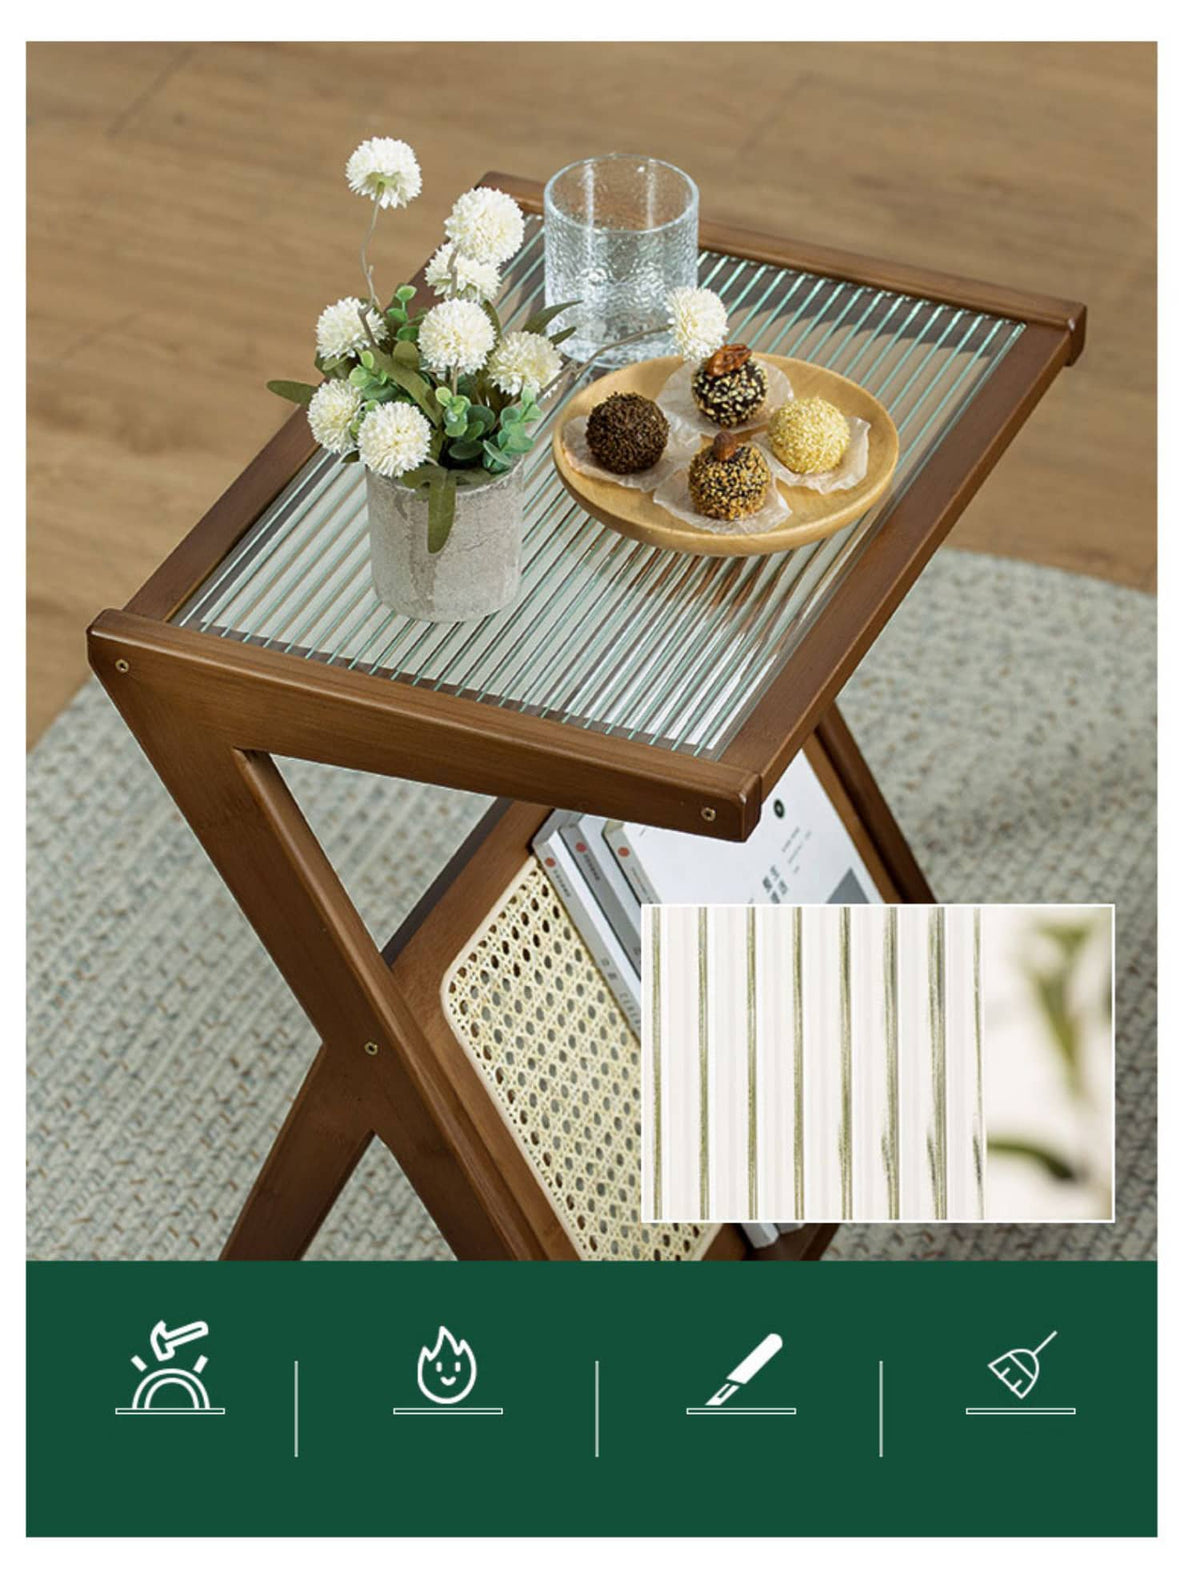 Elegant Natural Wood Tea Table with Reeded Glass – Brown, Grey & Dark Bamboo Styles hsl-76